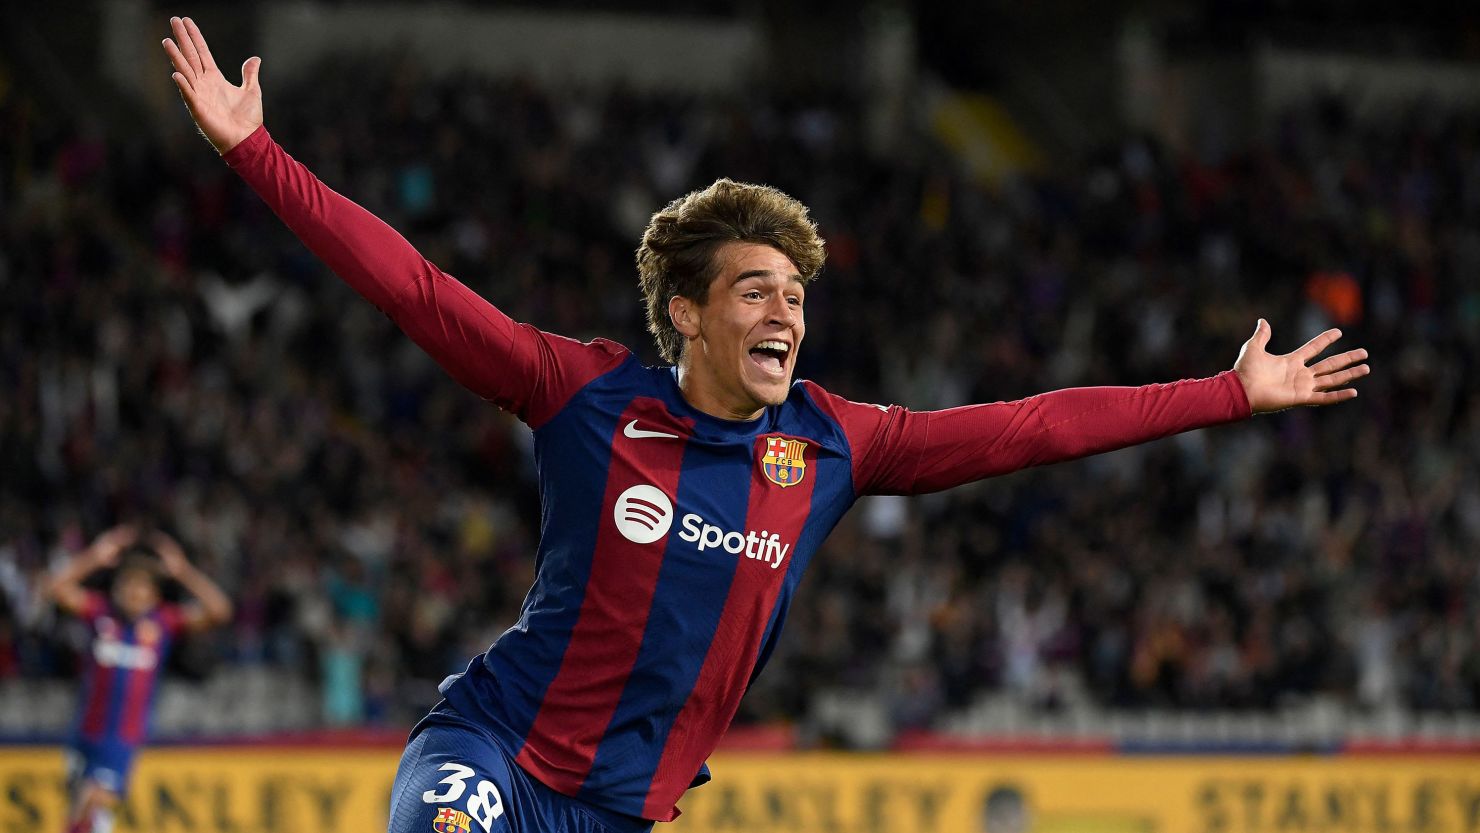 Marc Guiu, 17, becomes youngest debutant to score for Barcelona